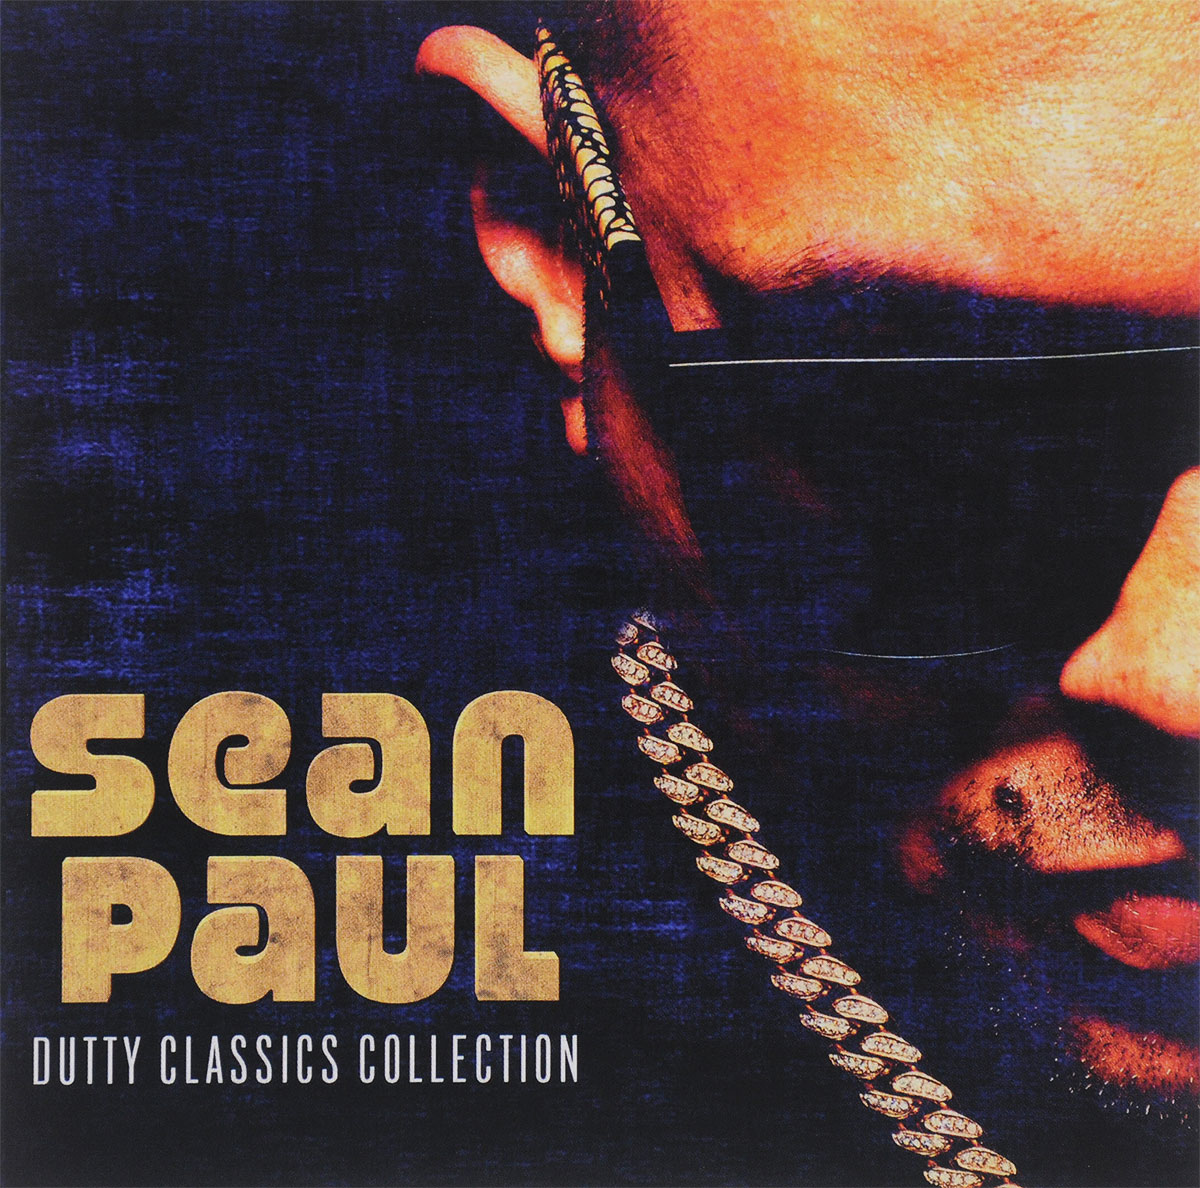 Sean Paul. Dutty Classics Collection